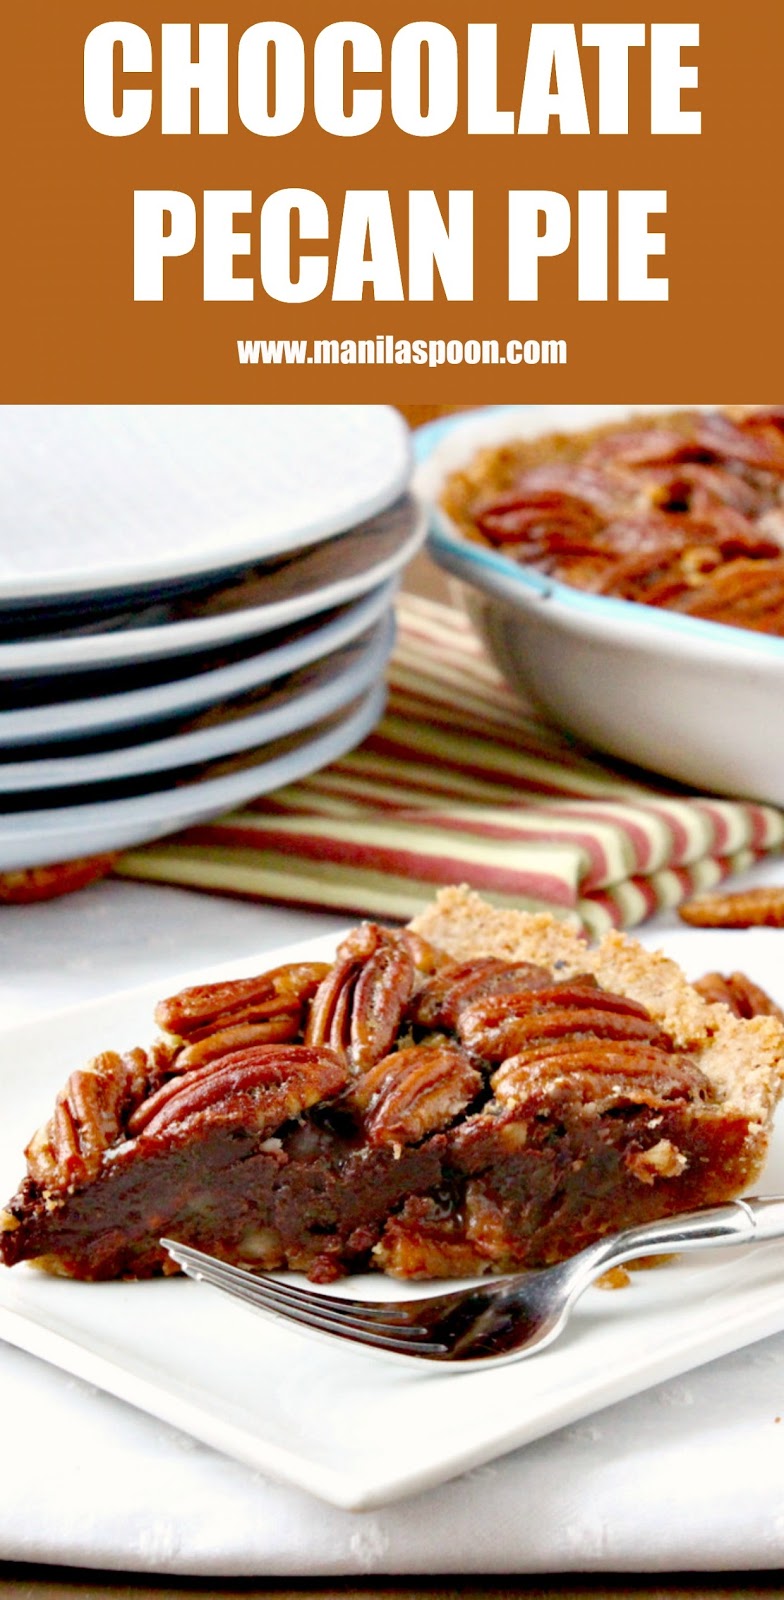 The ultimate dessert for Thanksgiving and Christmas - CHOCOLATE PECAN PIE! This is superbly yummy, easy and looks so pretty, too!